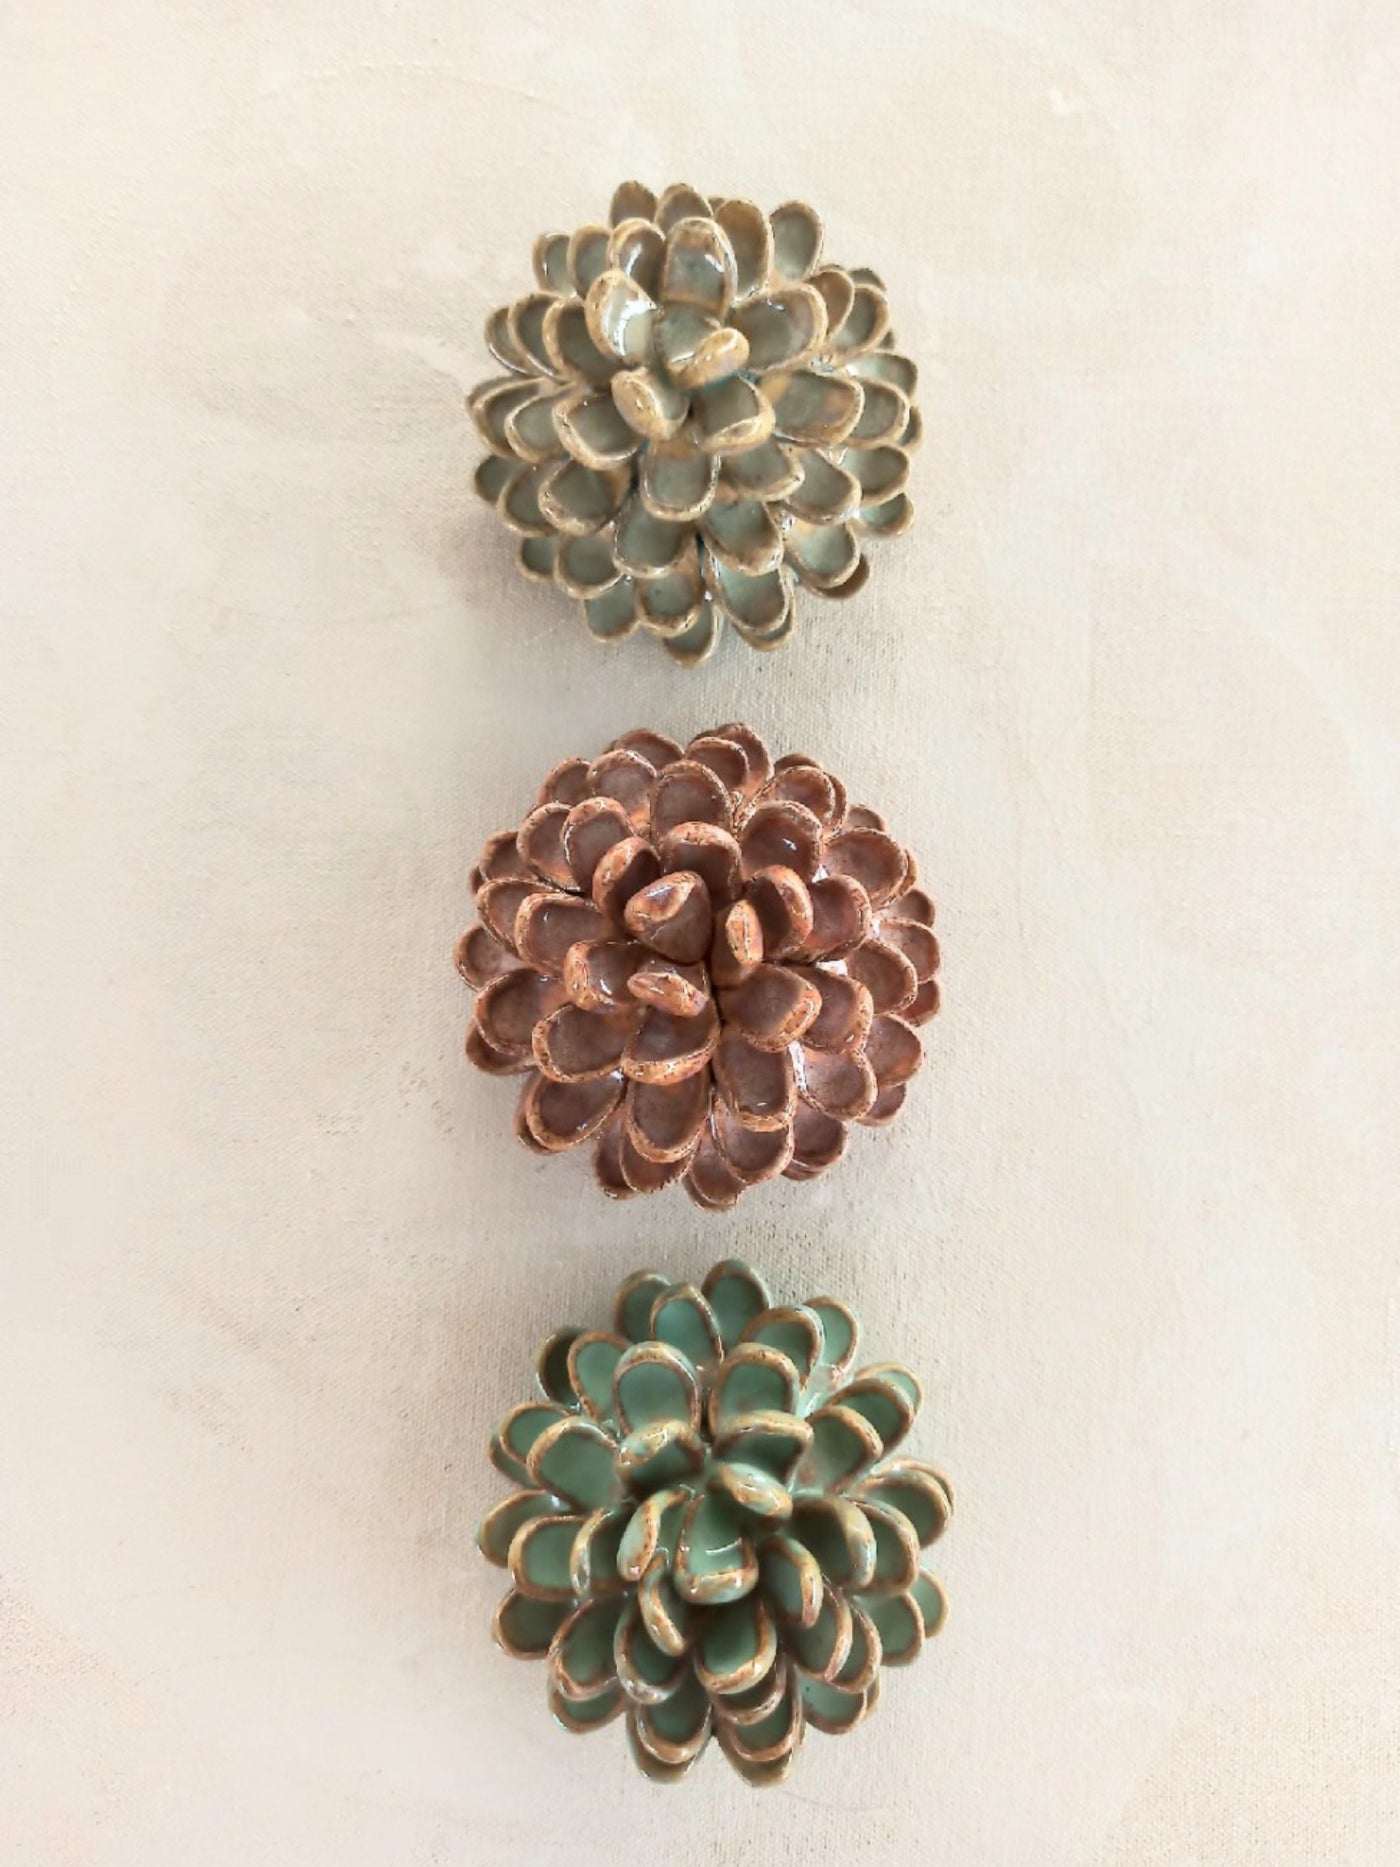 FLORETS - WALL FLOWERS SET OF 3